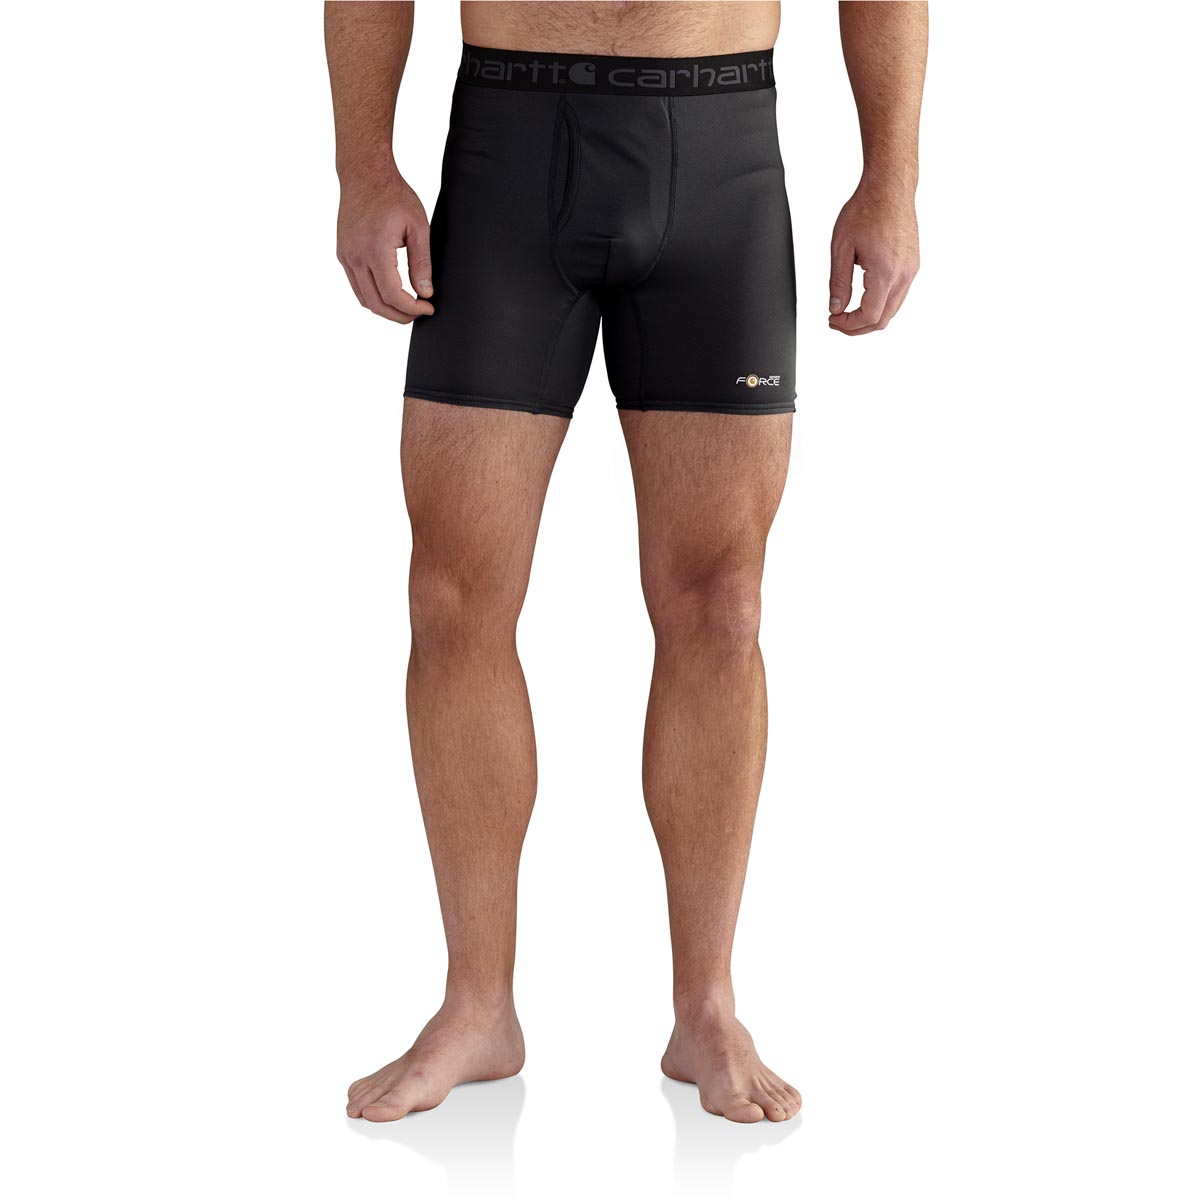 Carhartt Men's Base Force Extremes Lightweight Boxer Brief